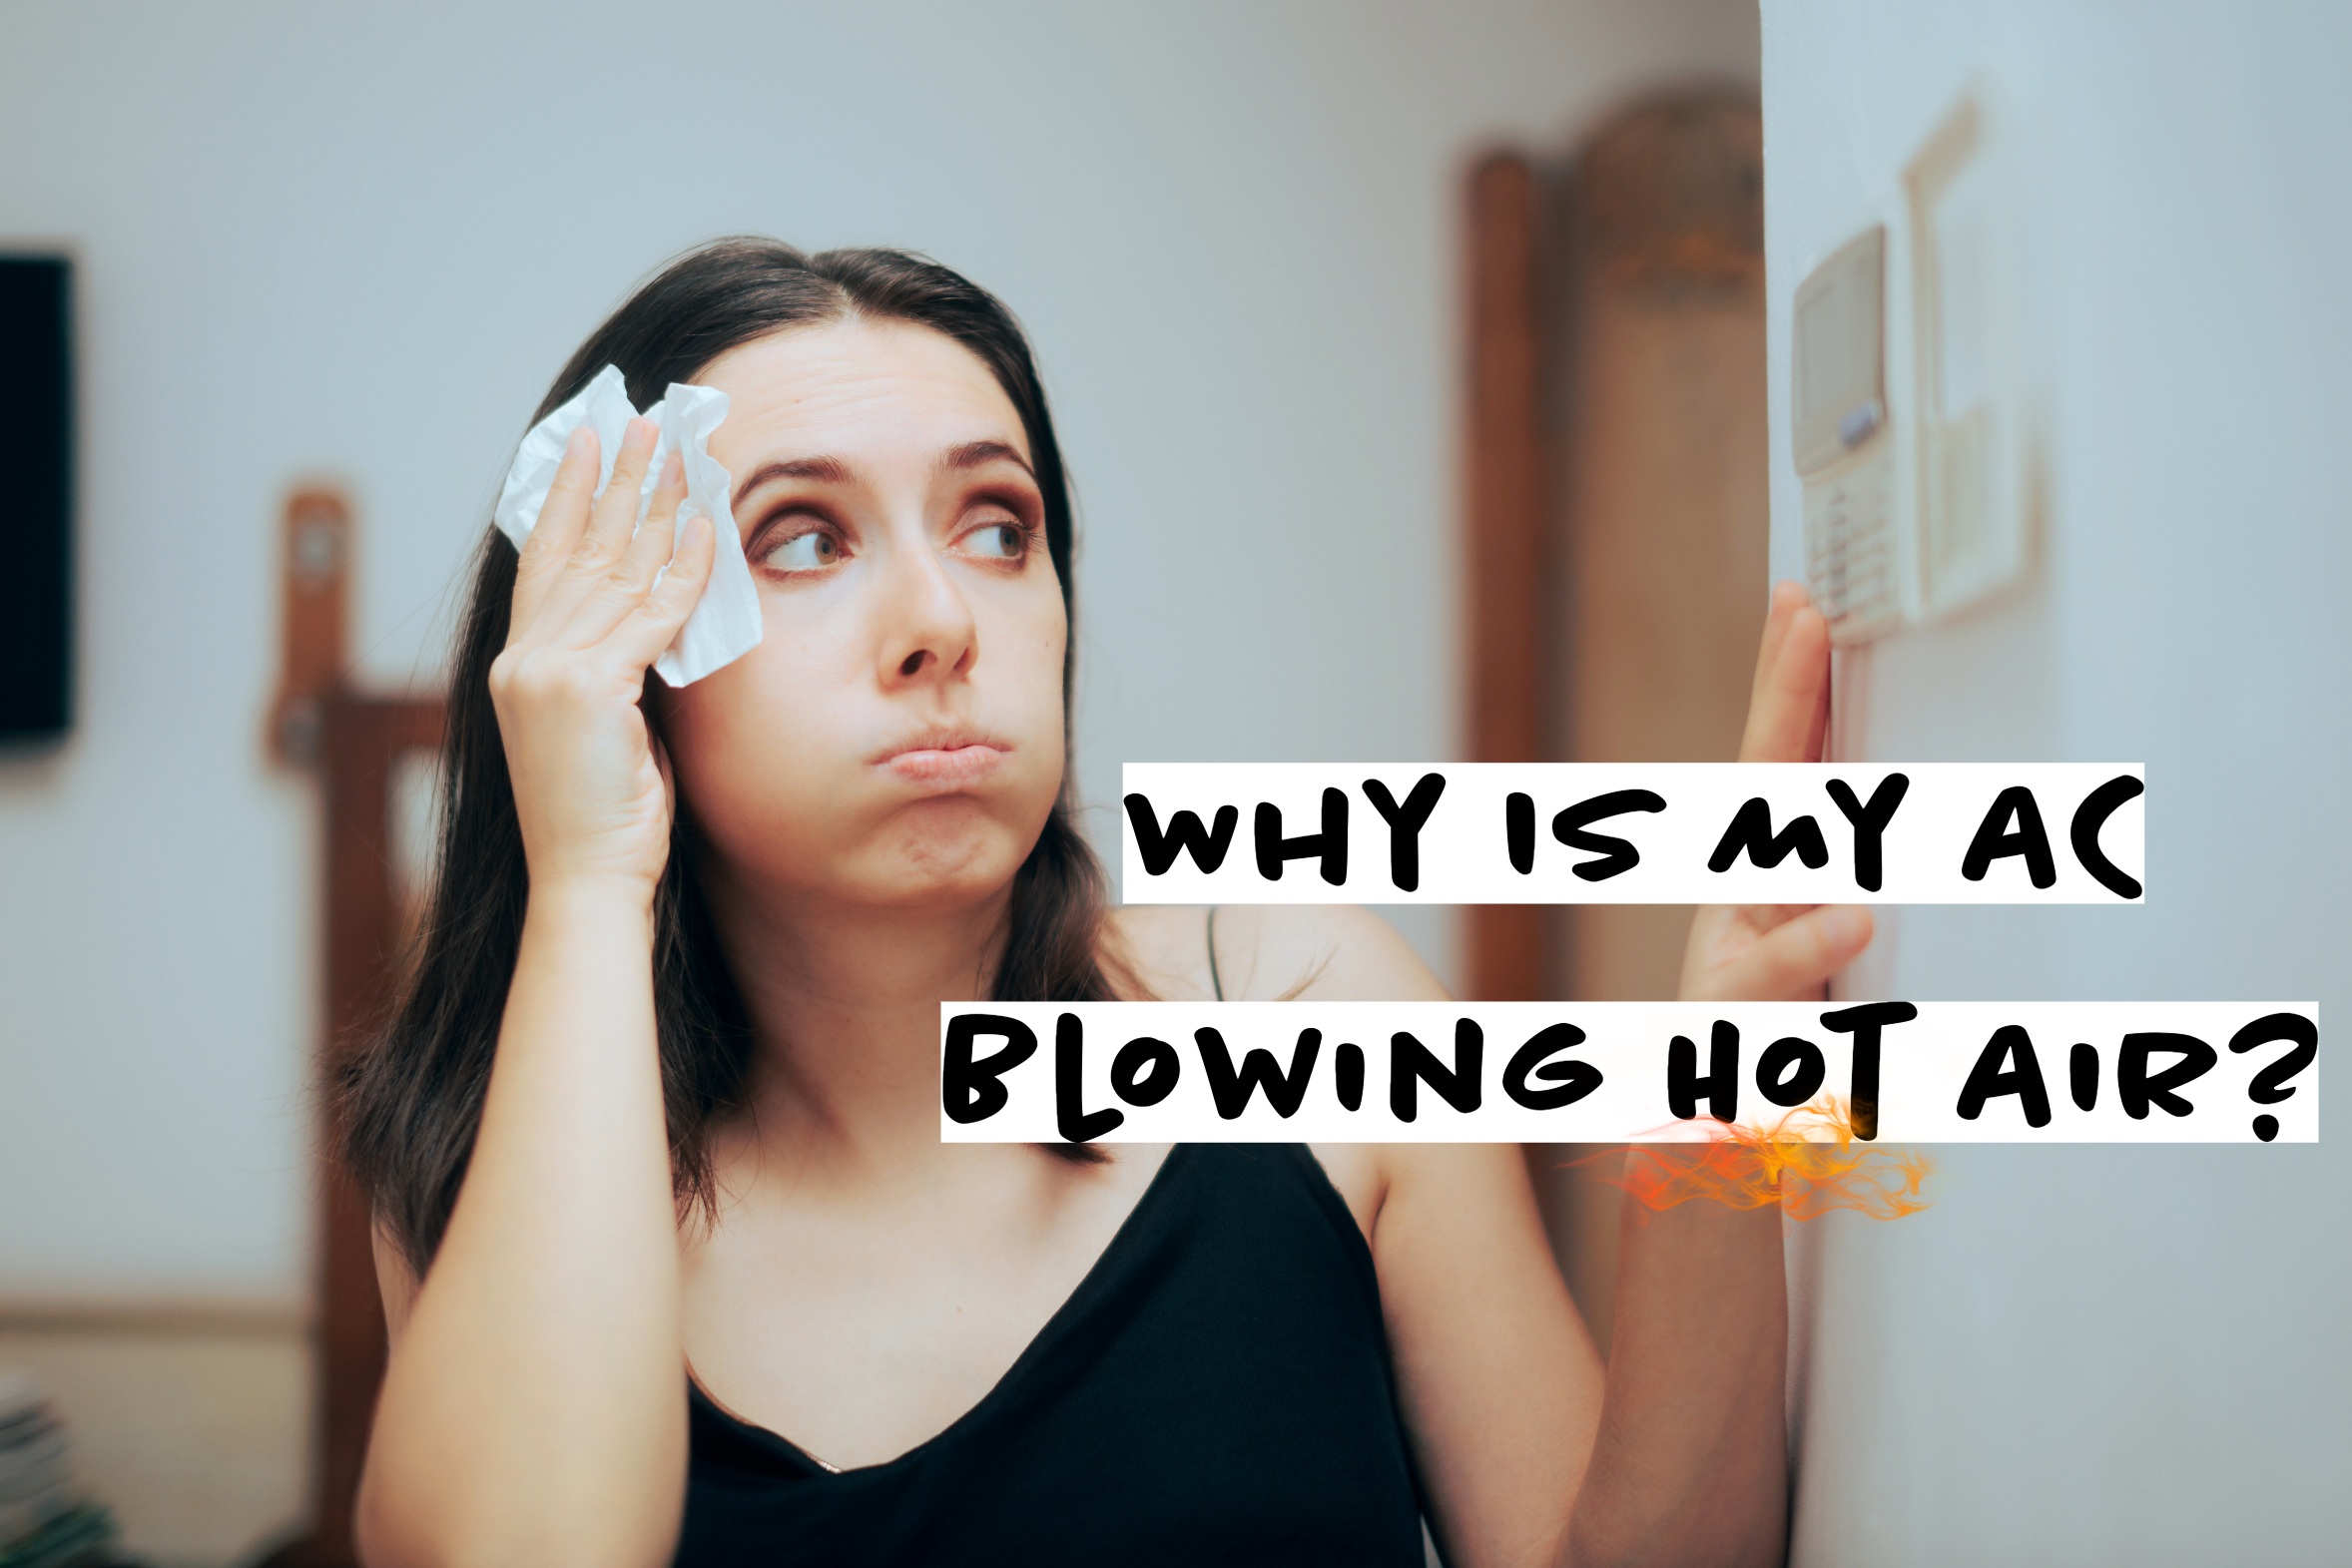 Why is my AC blowing hot air?